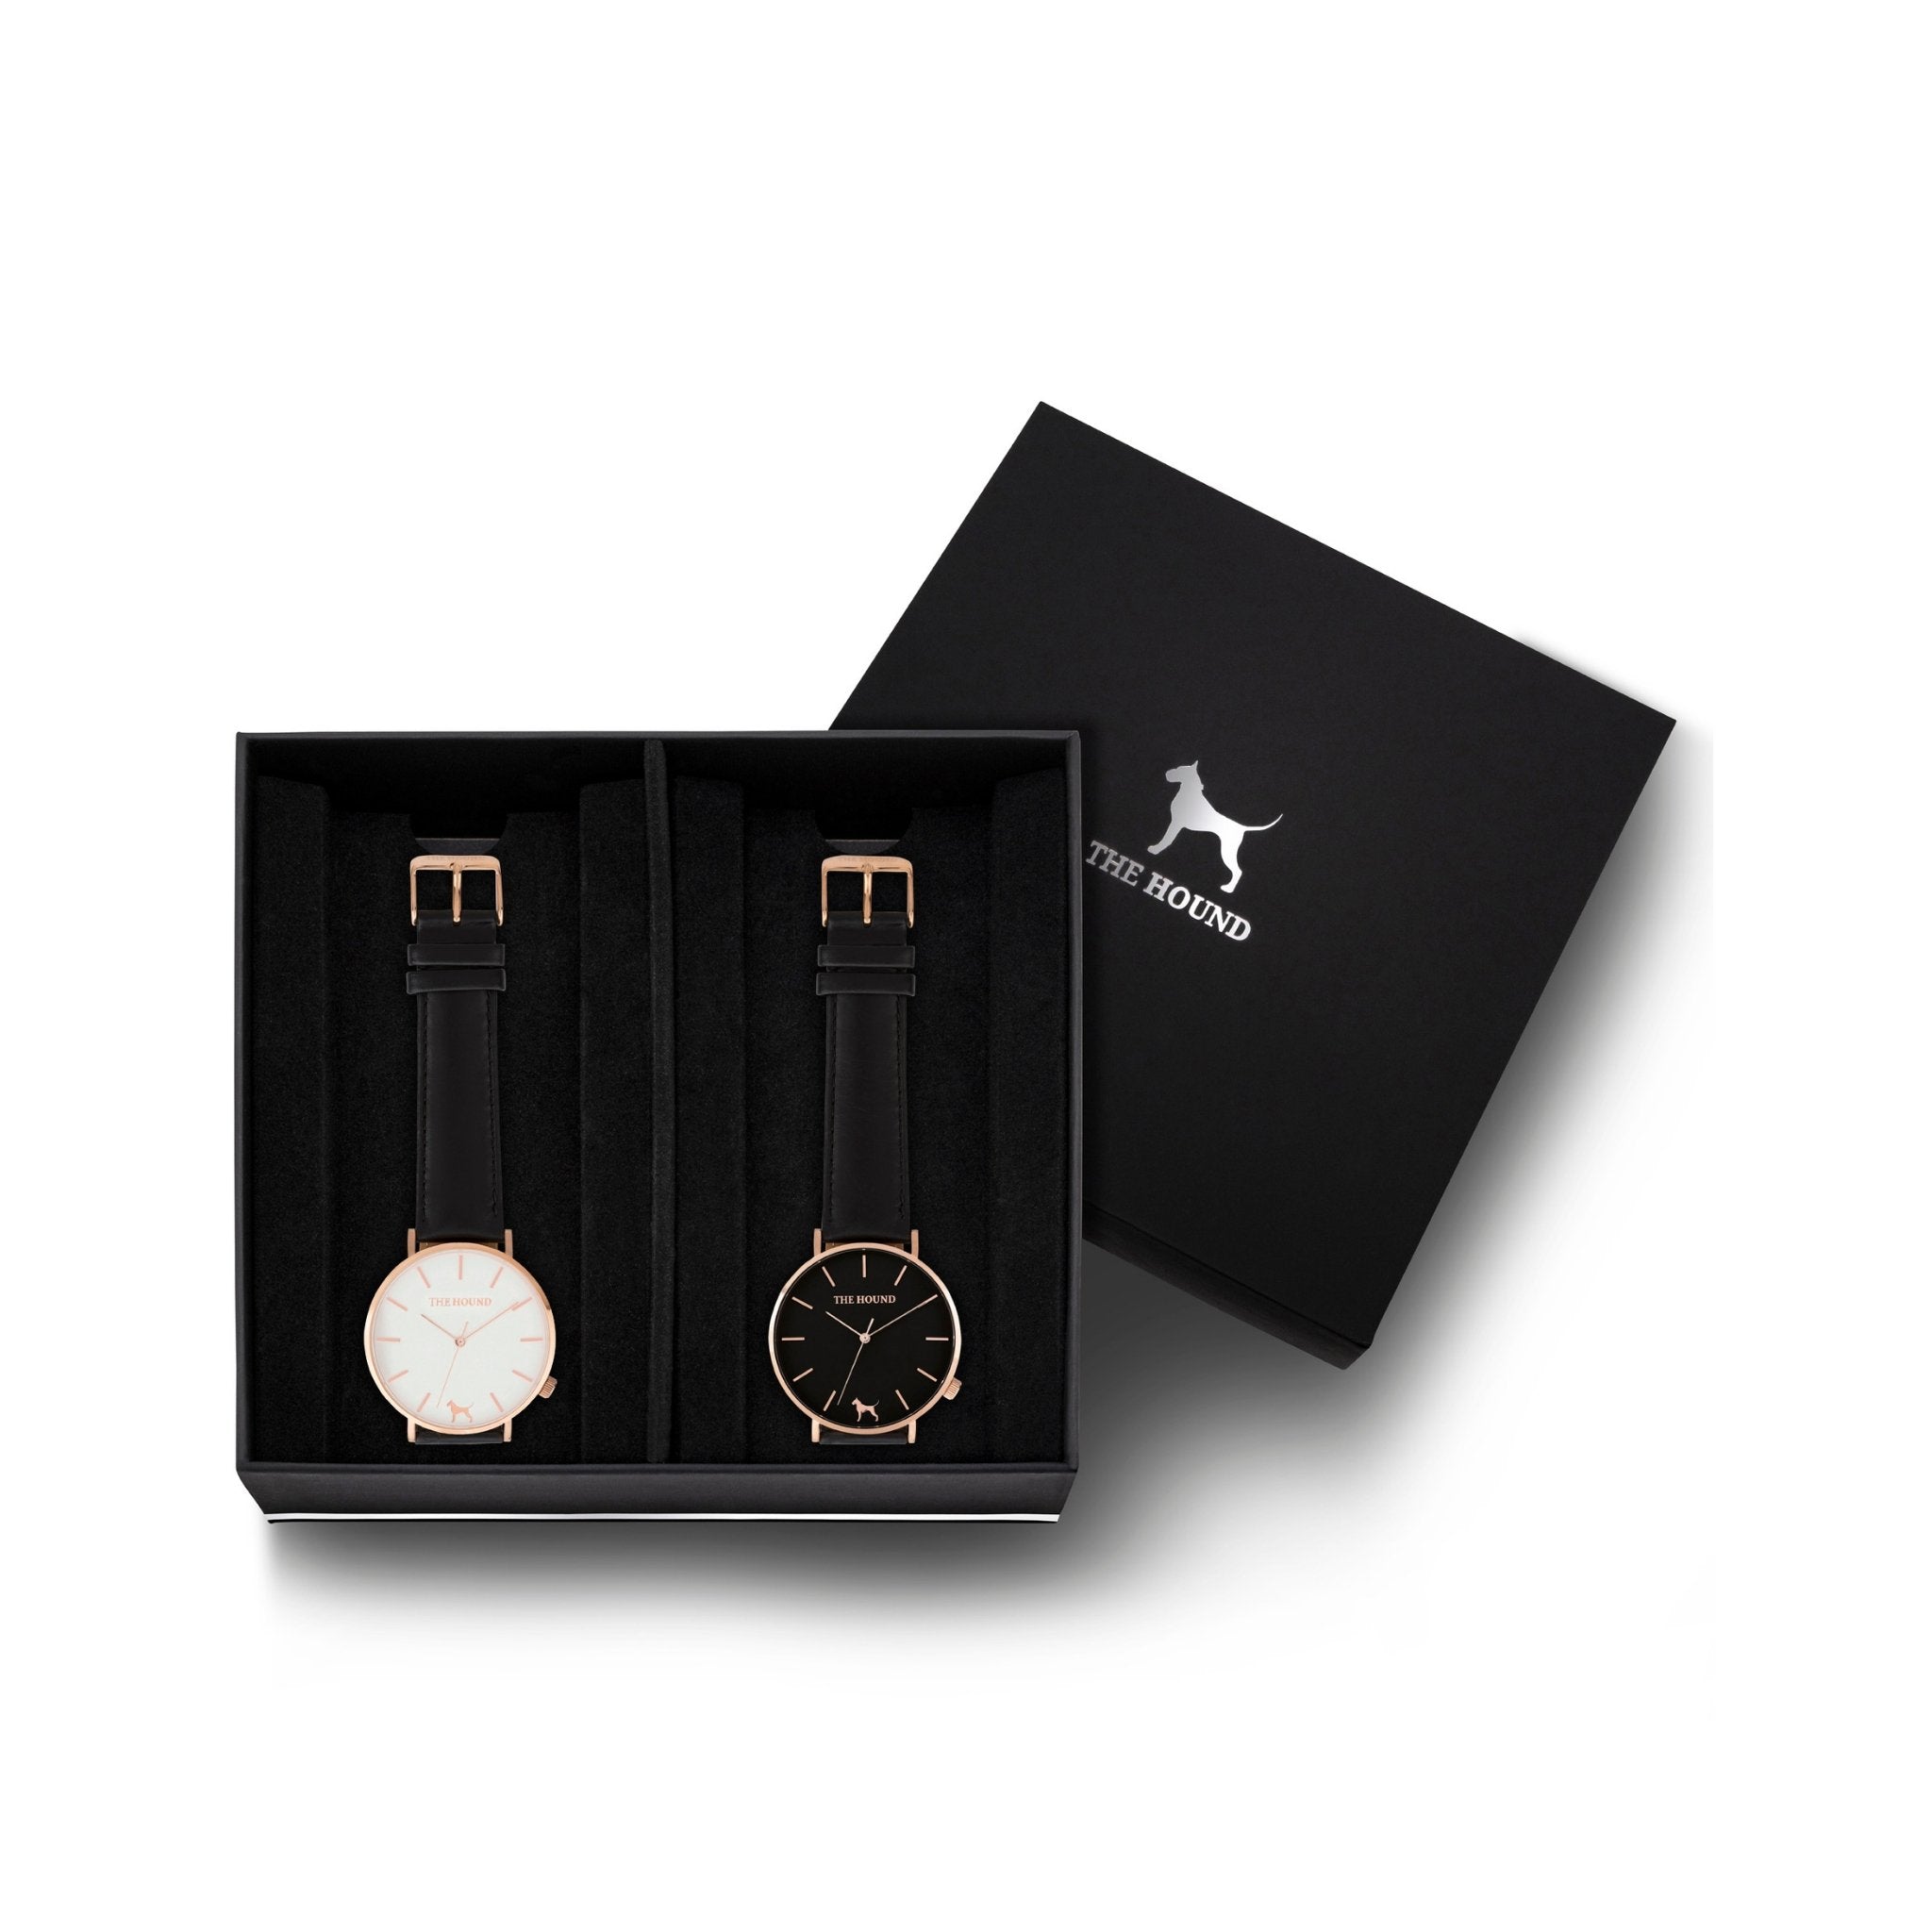 Custom gift set - Rose gold and white watch with stitched black genuine leather band and a rose gold and black watch with stitched black genuine leather band